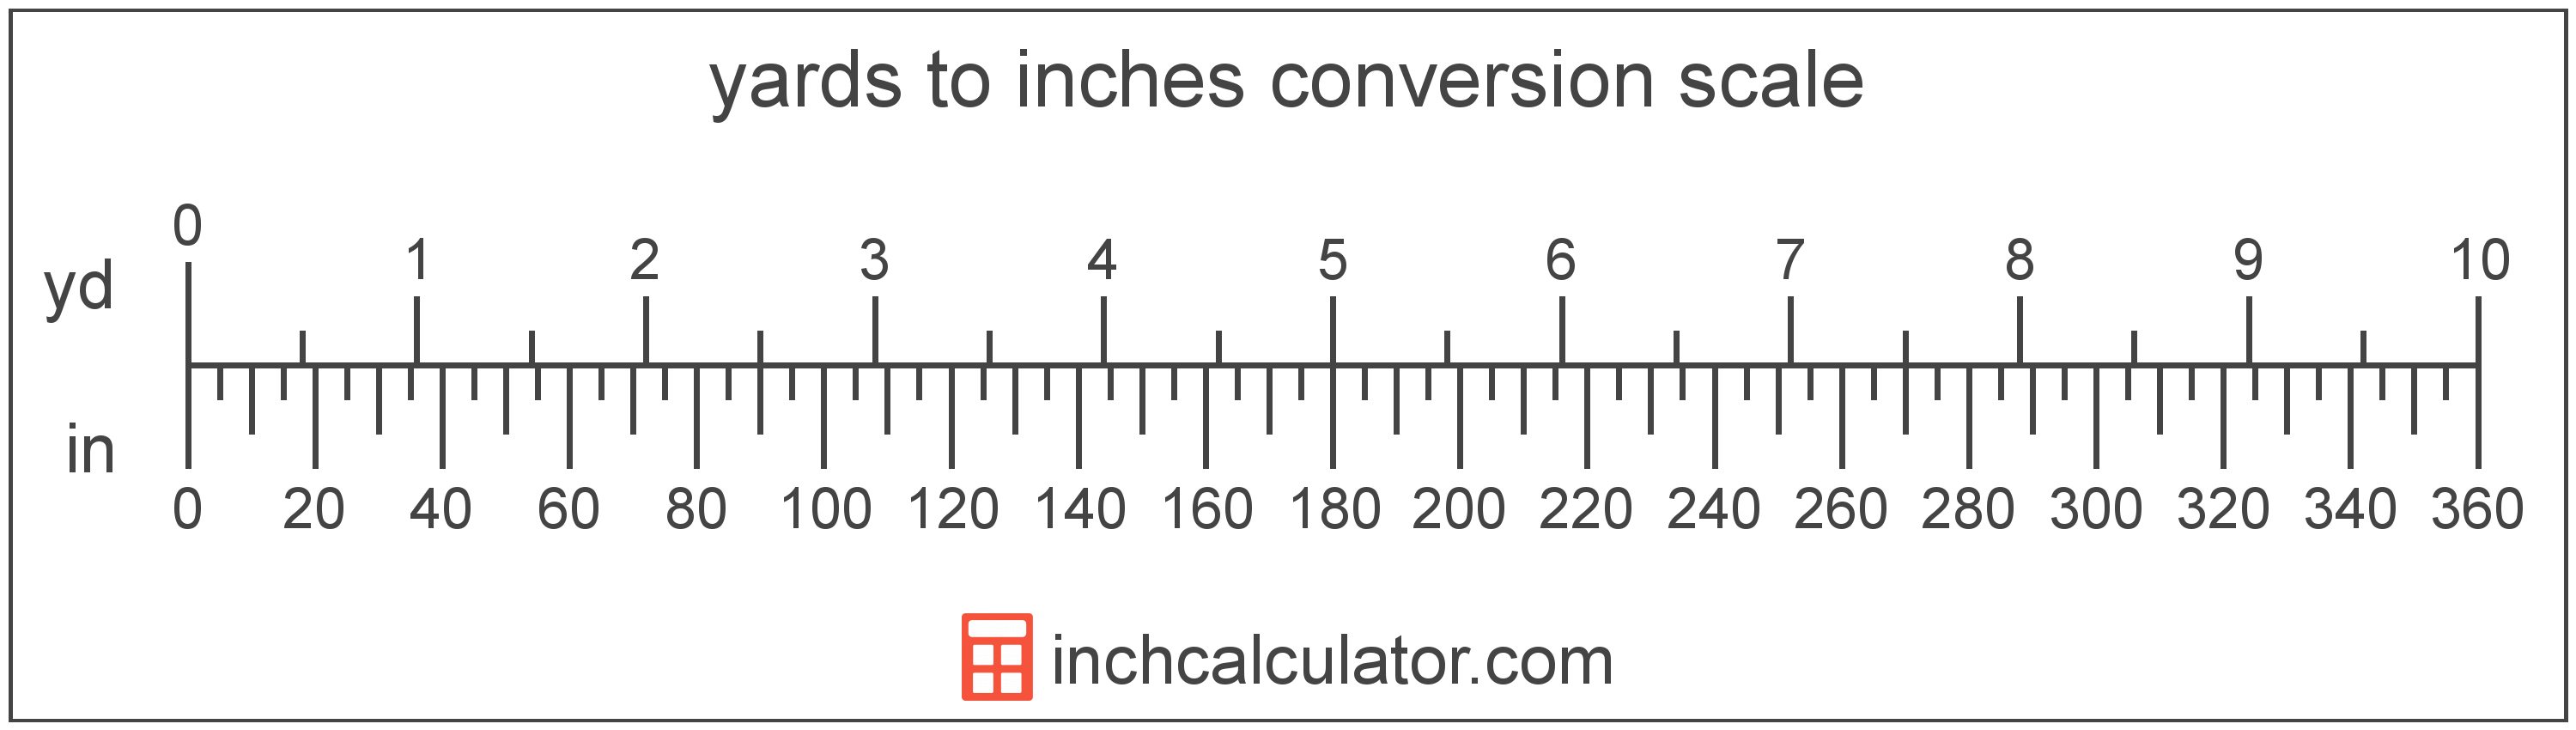 convert-inches-to-yards-in-to-yd-inch-calculator